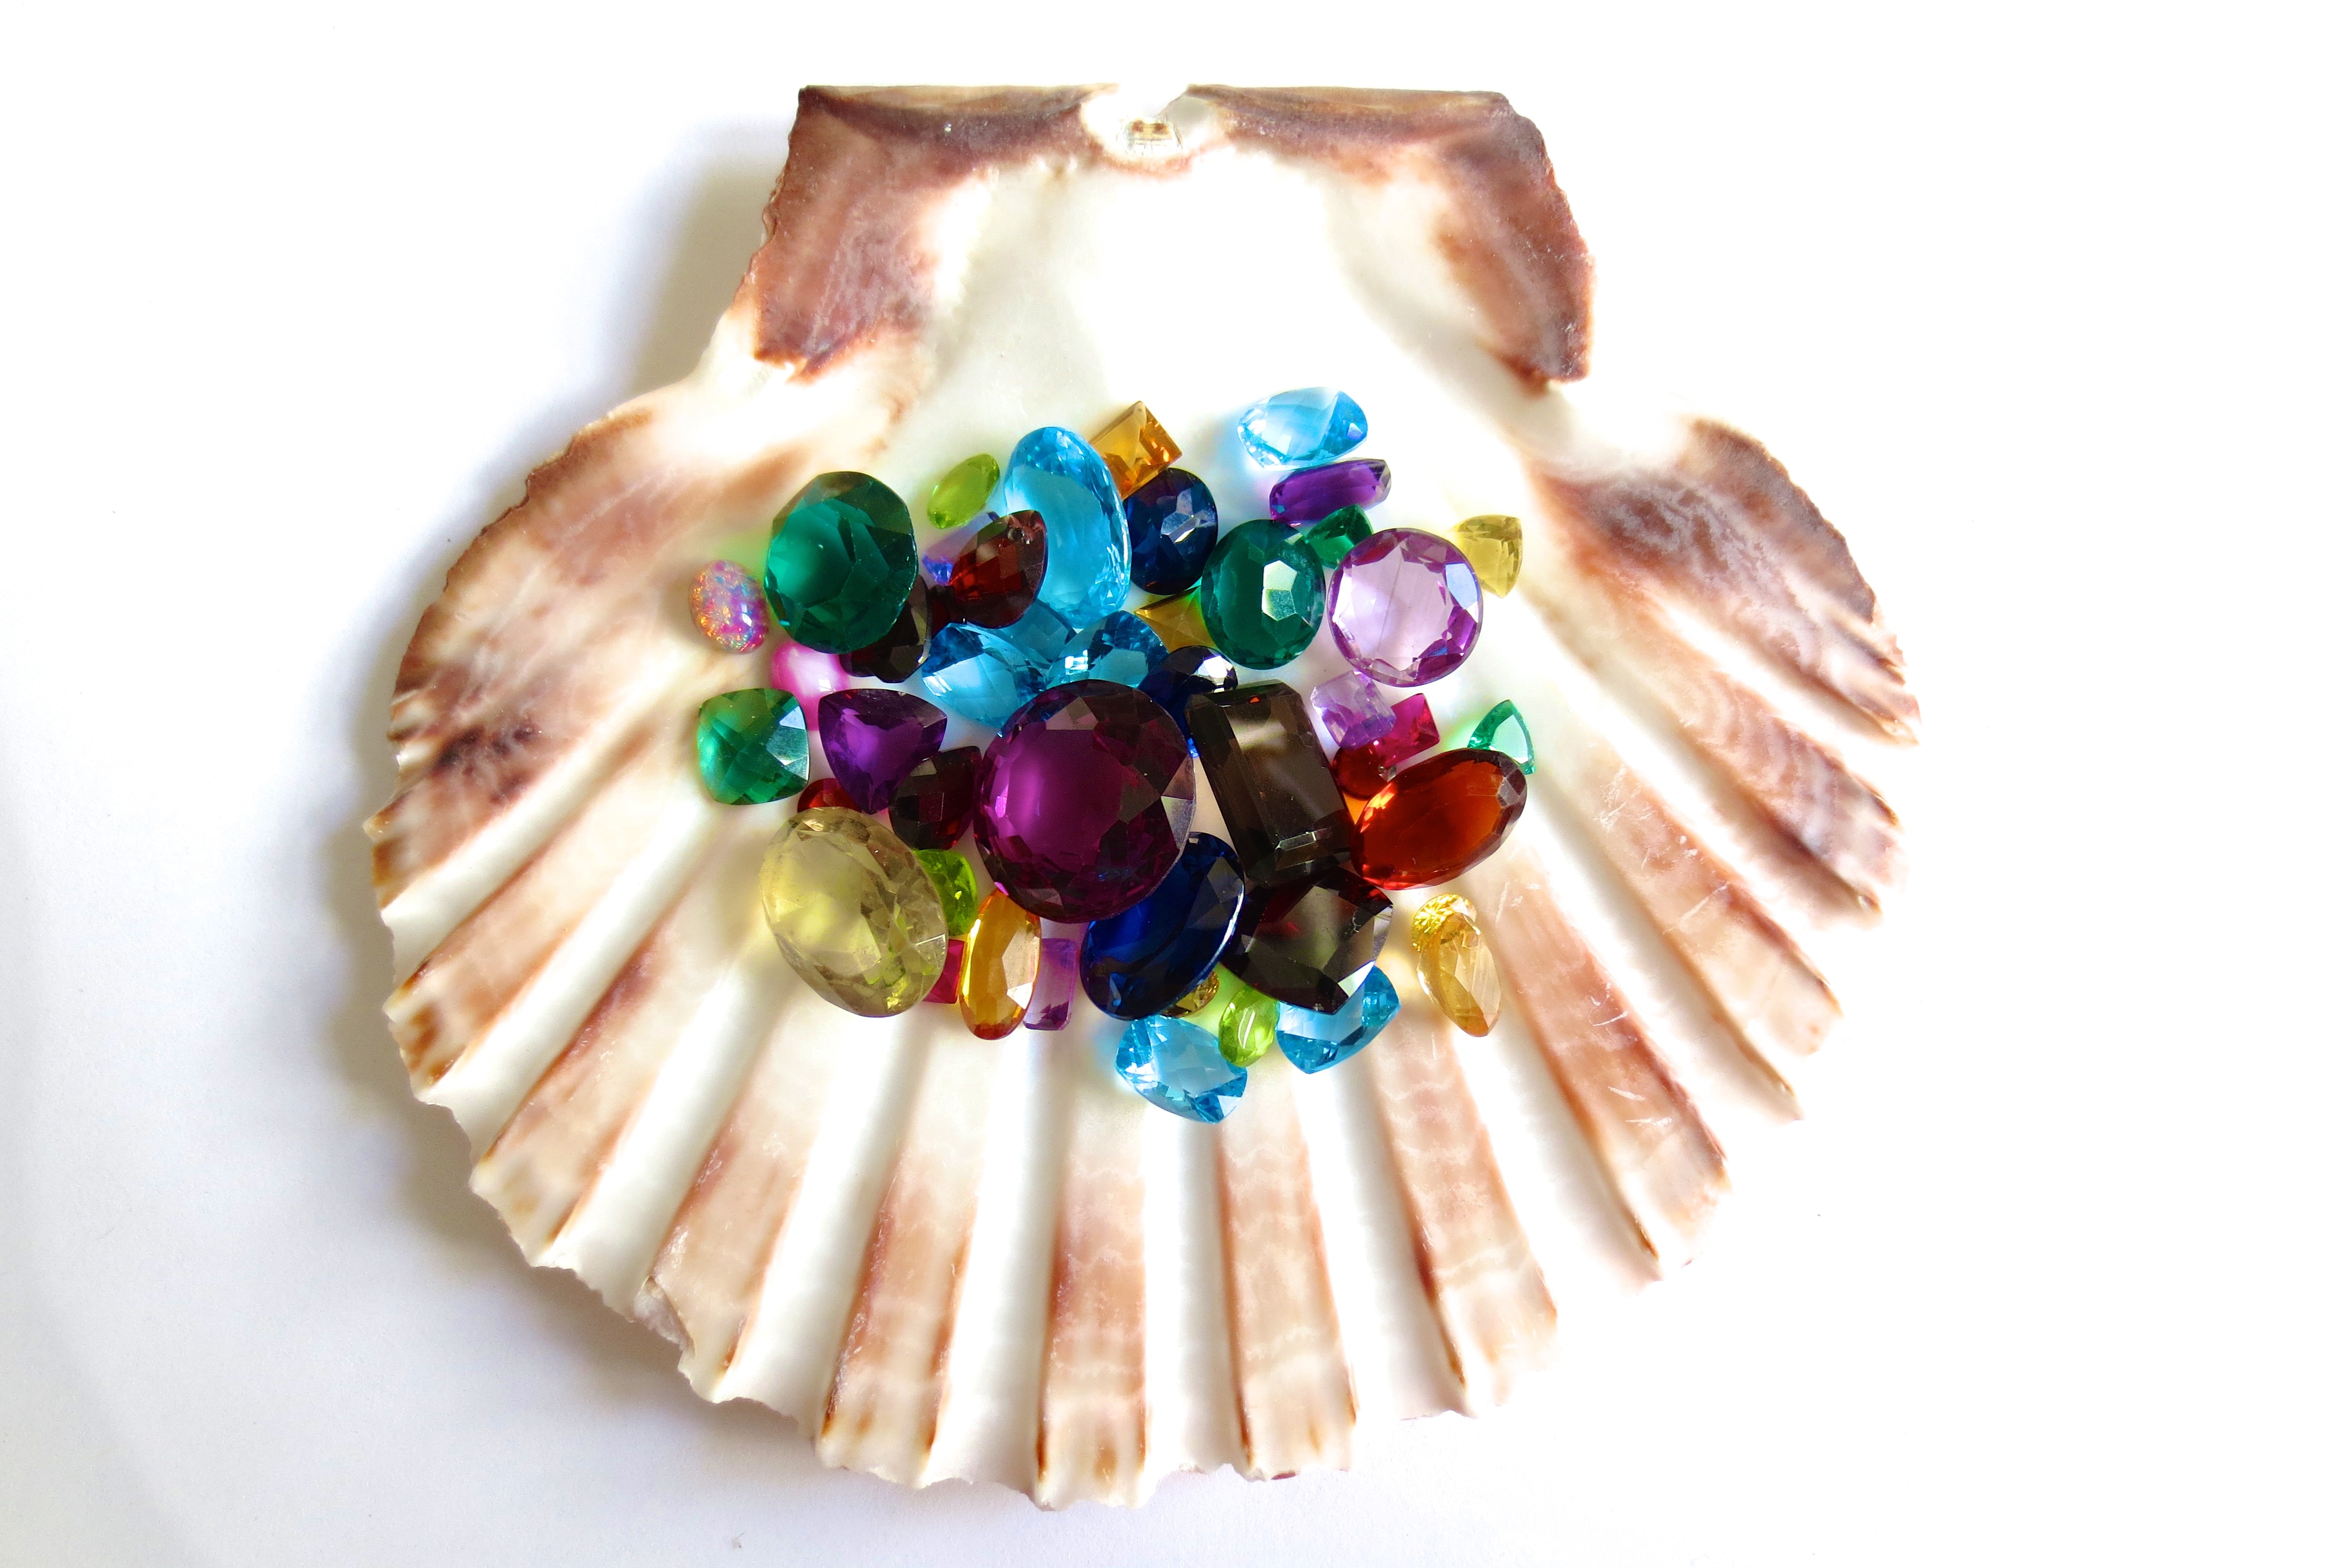 brown and white shell with blue emerald amber and amethyst gemstones